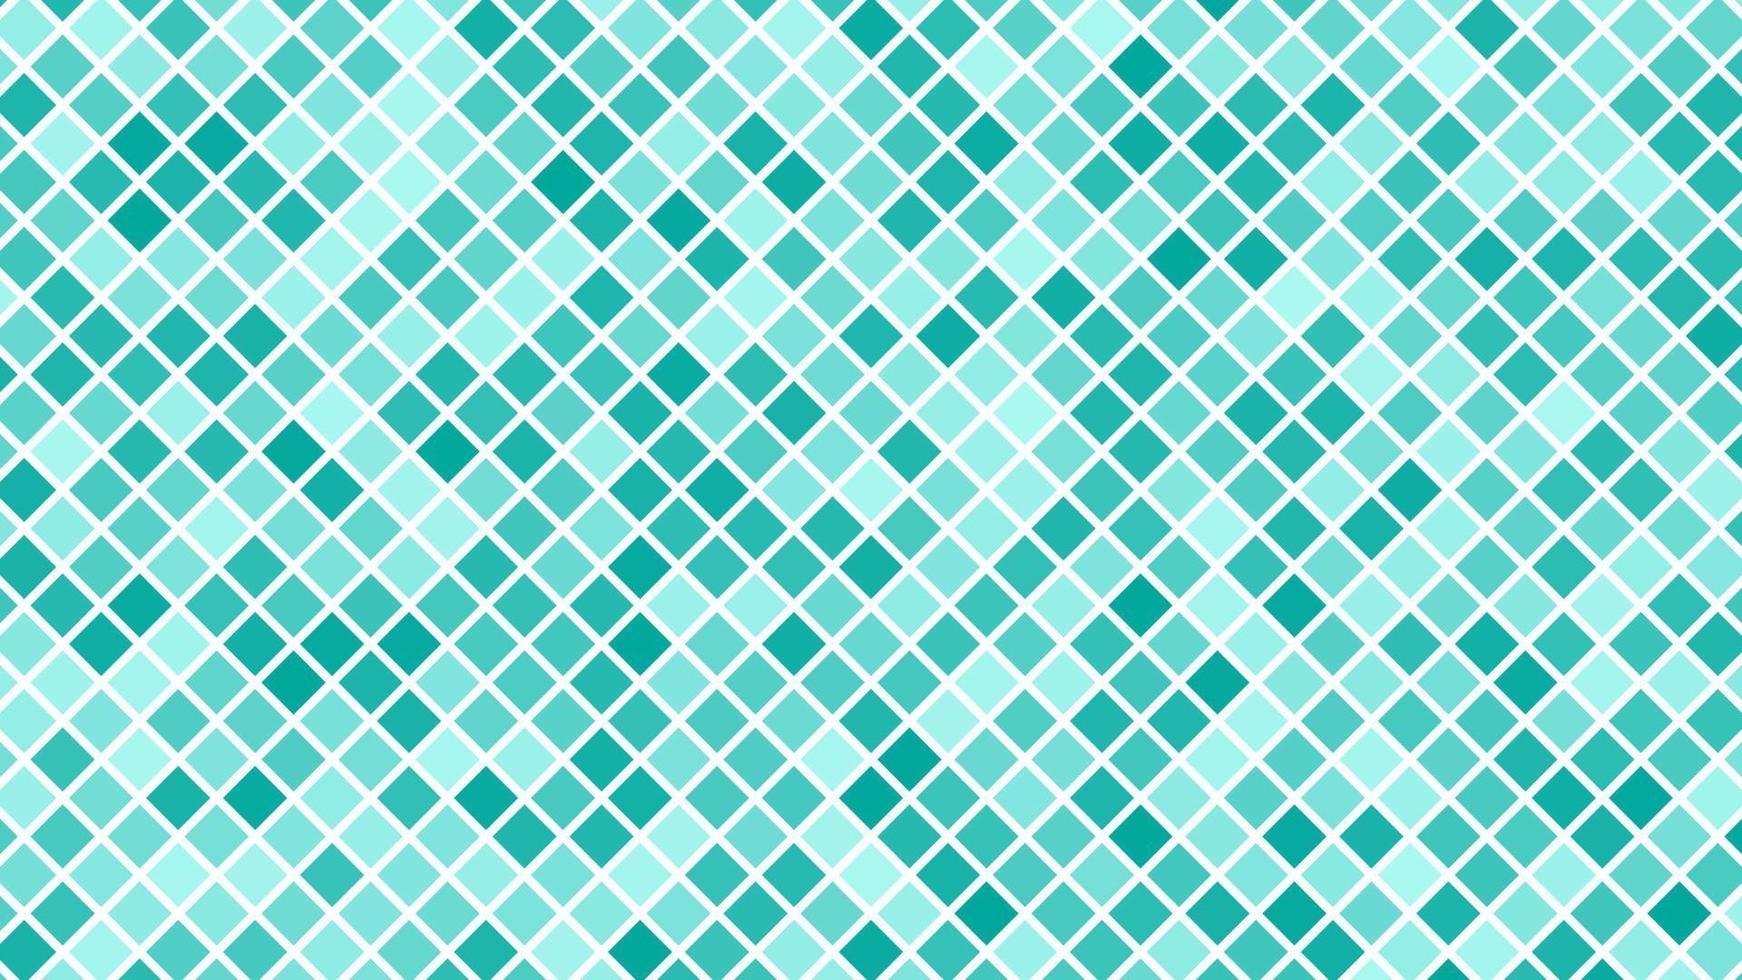 Abstract flat square geometric background vector